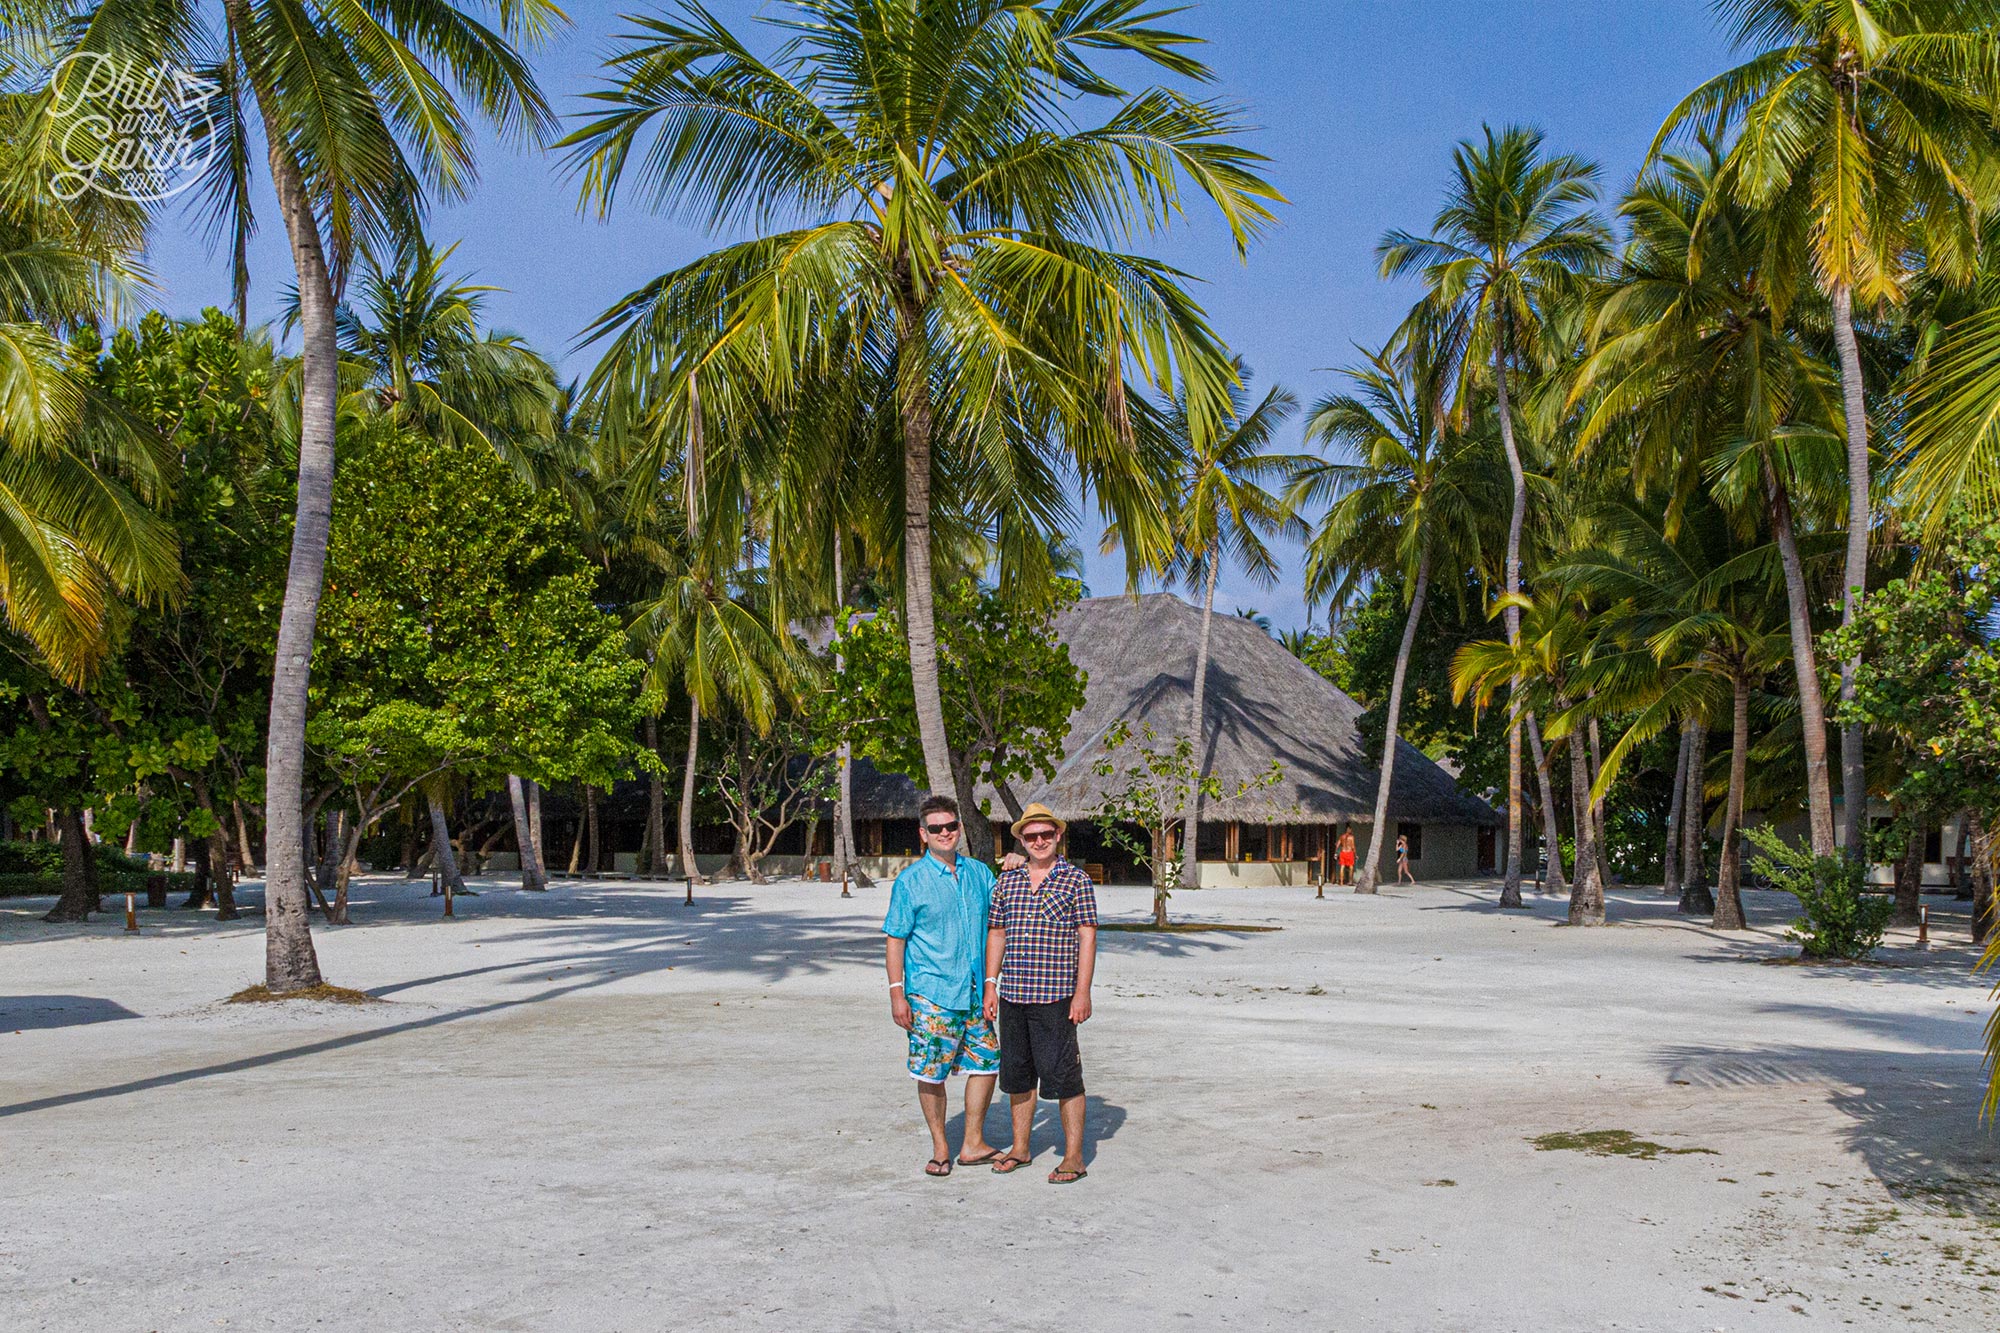 Phli and Garth surrounded by coconut palm trees